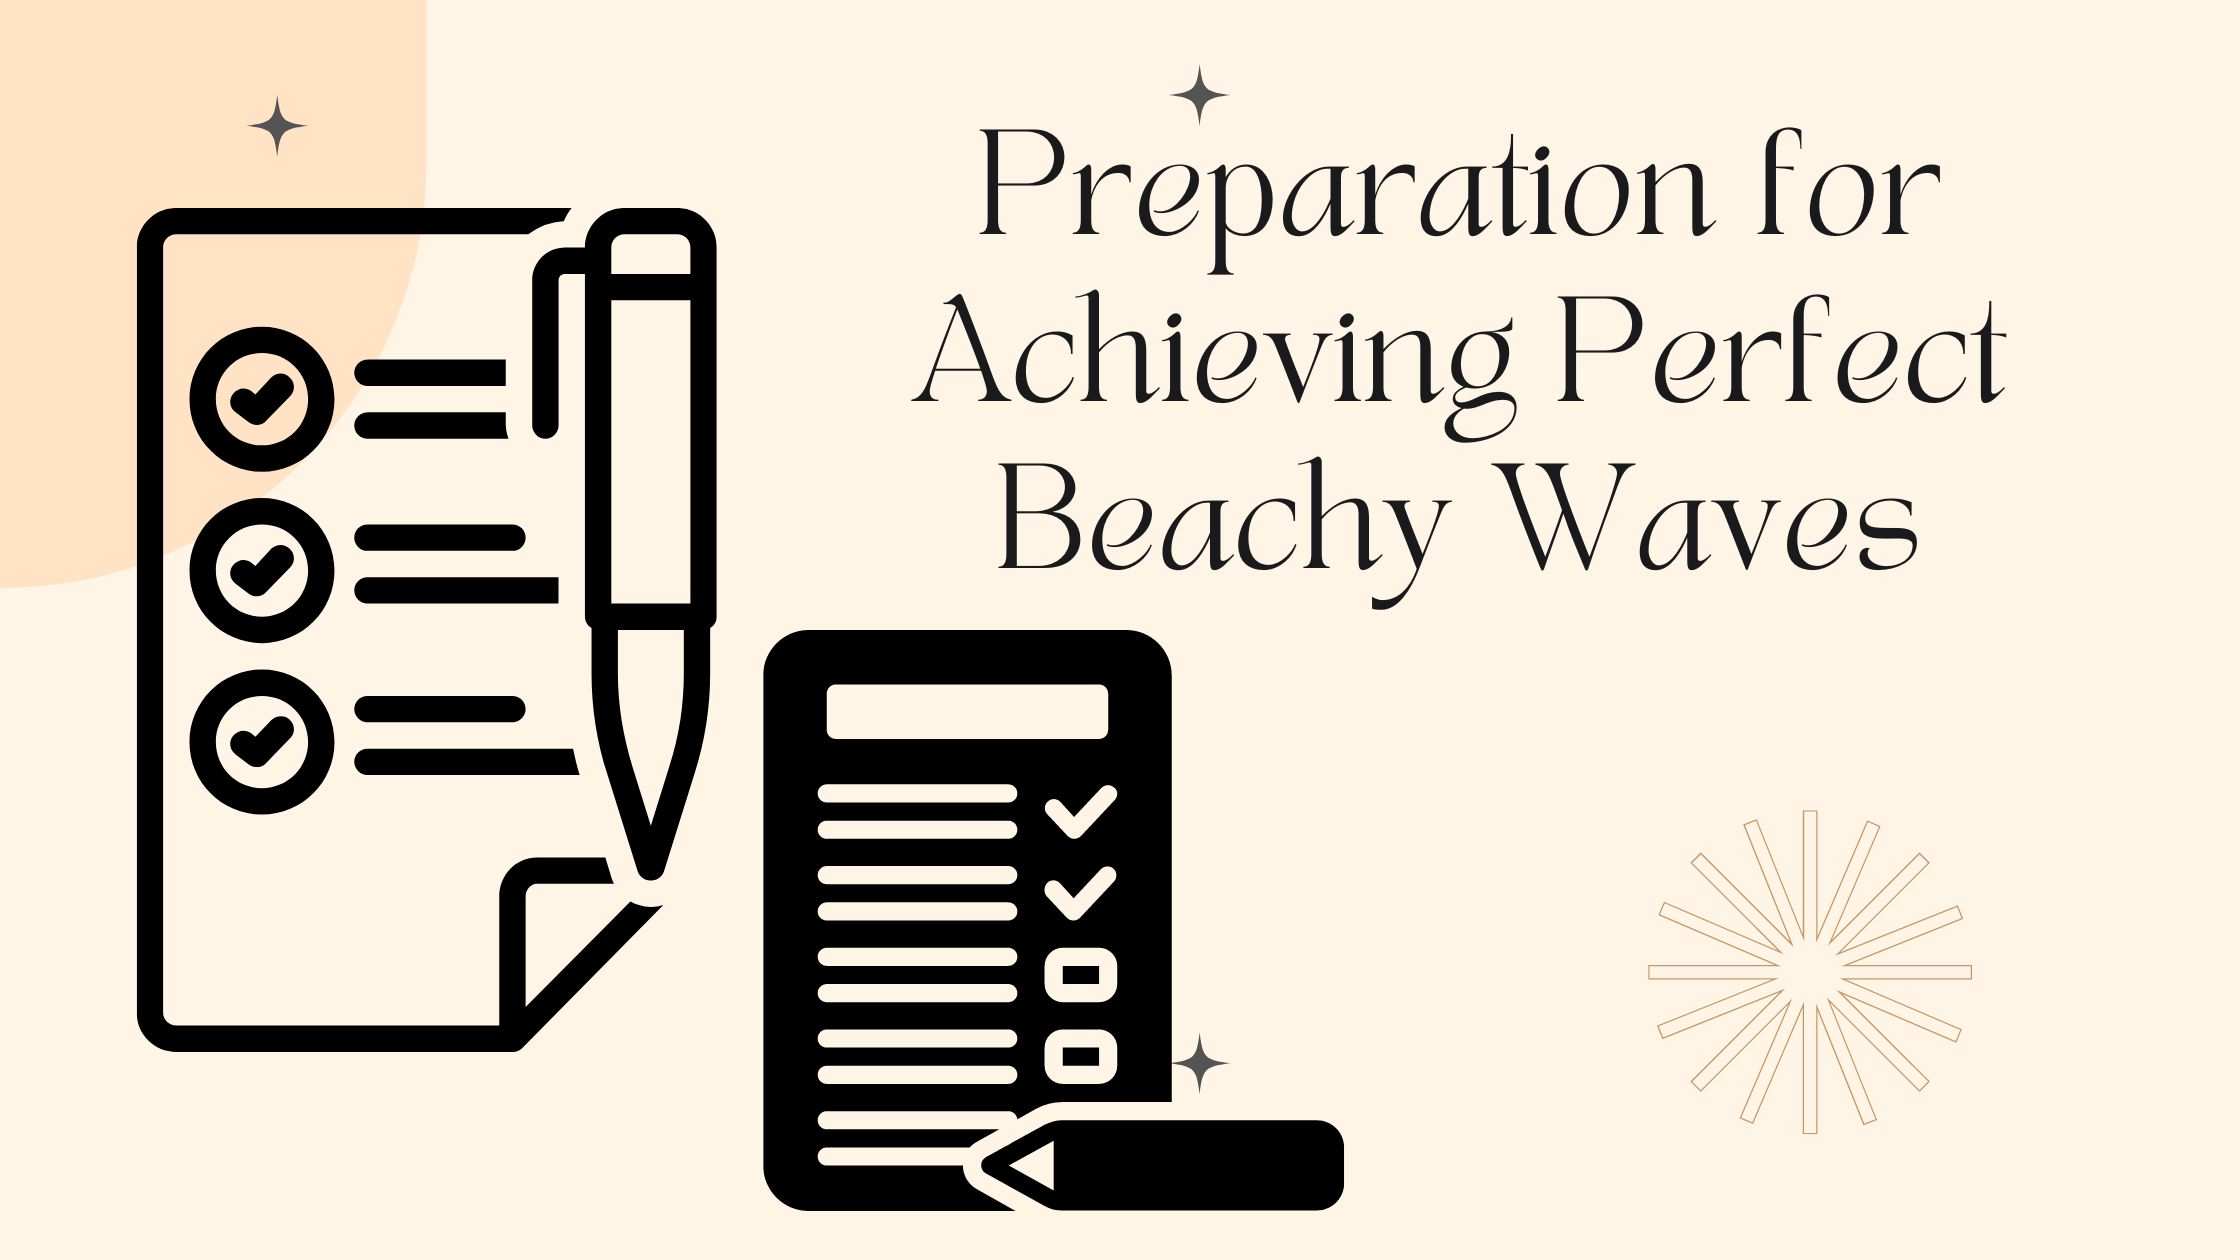 Preparation for Achieving Perfect Beachy Waves